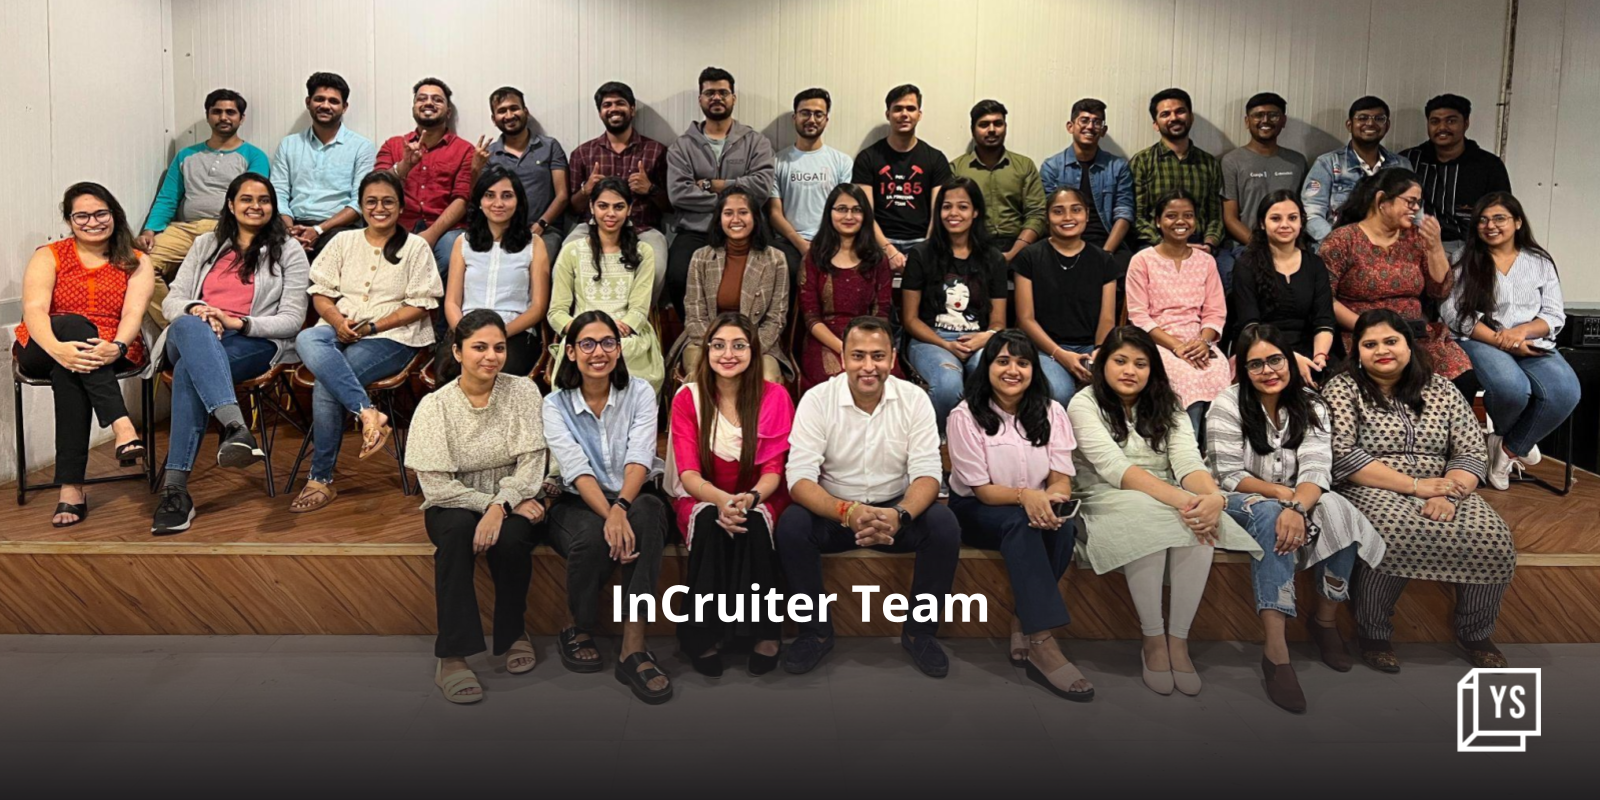 IaaS startup InCruiter raises Rs 100 lakh from Recur Club